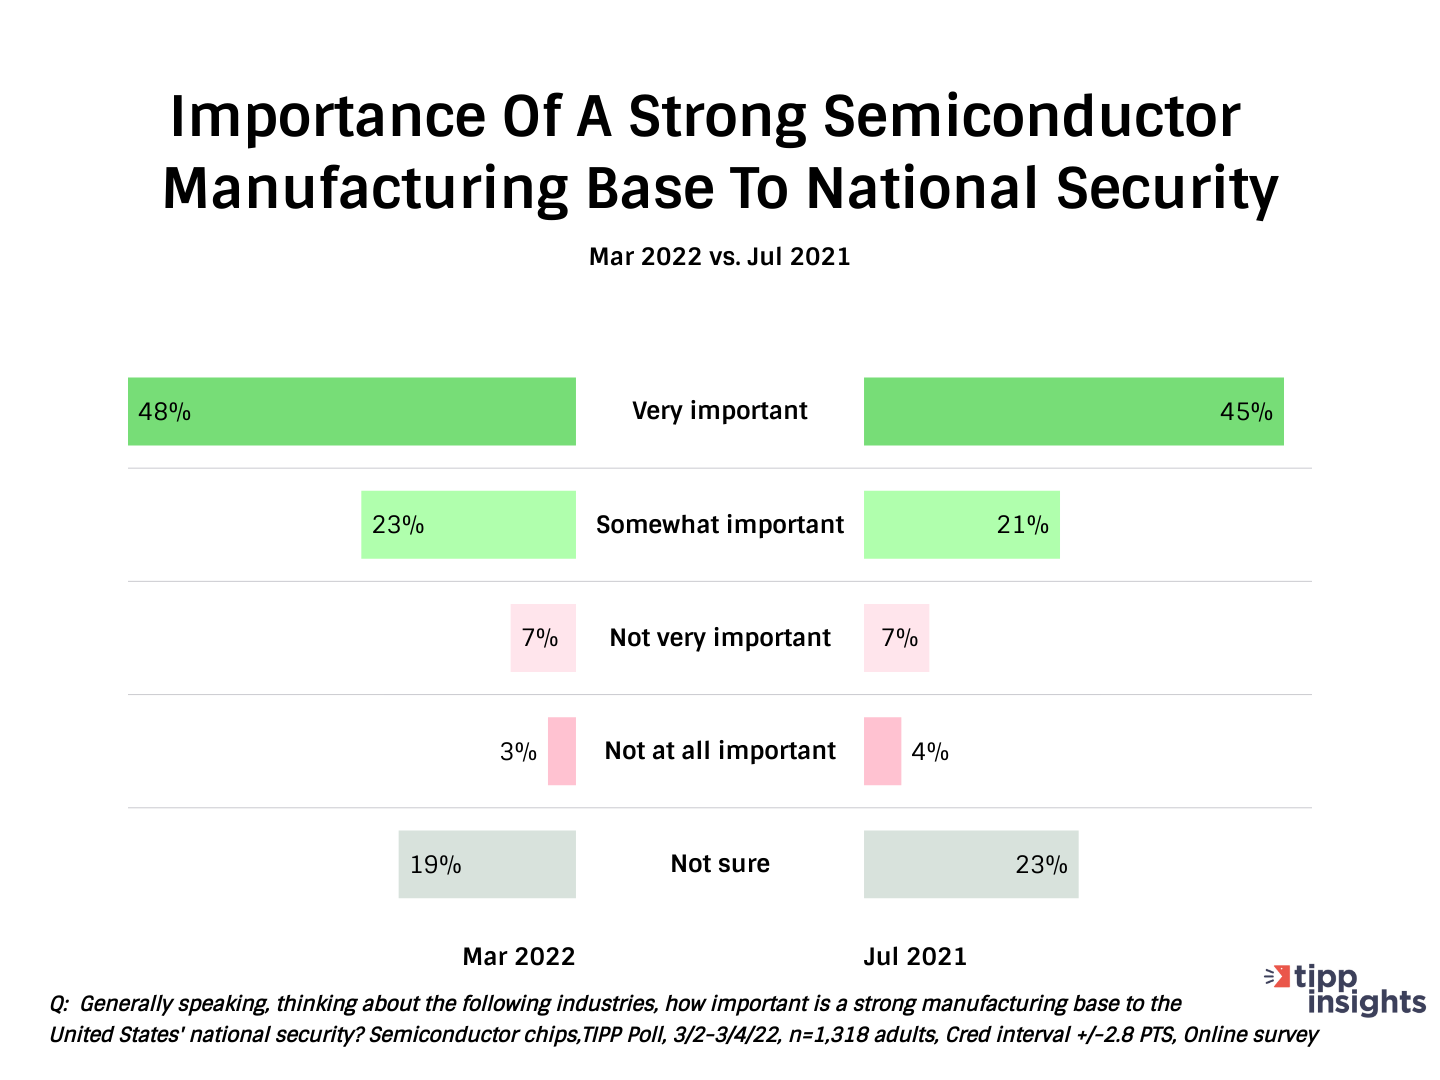 Importance of a strong semiconductor manufacturing base to national security - March 2022 vs. July 2021